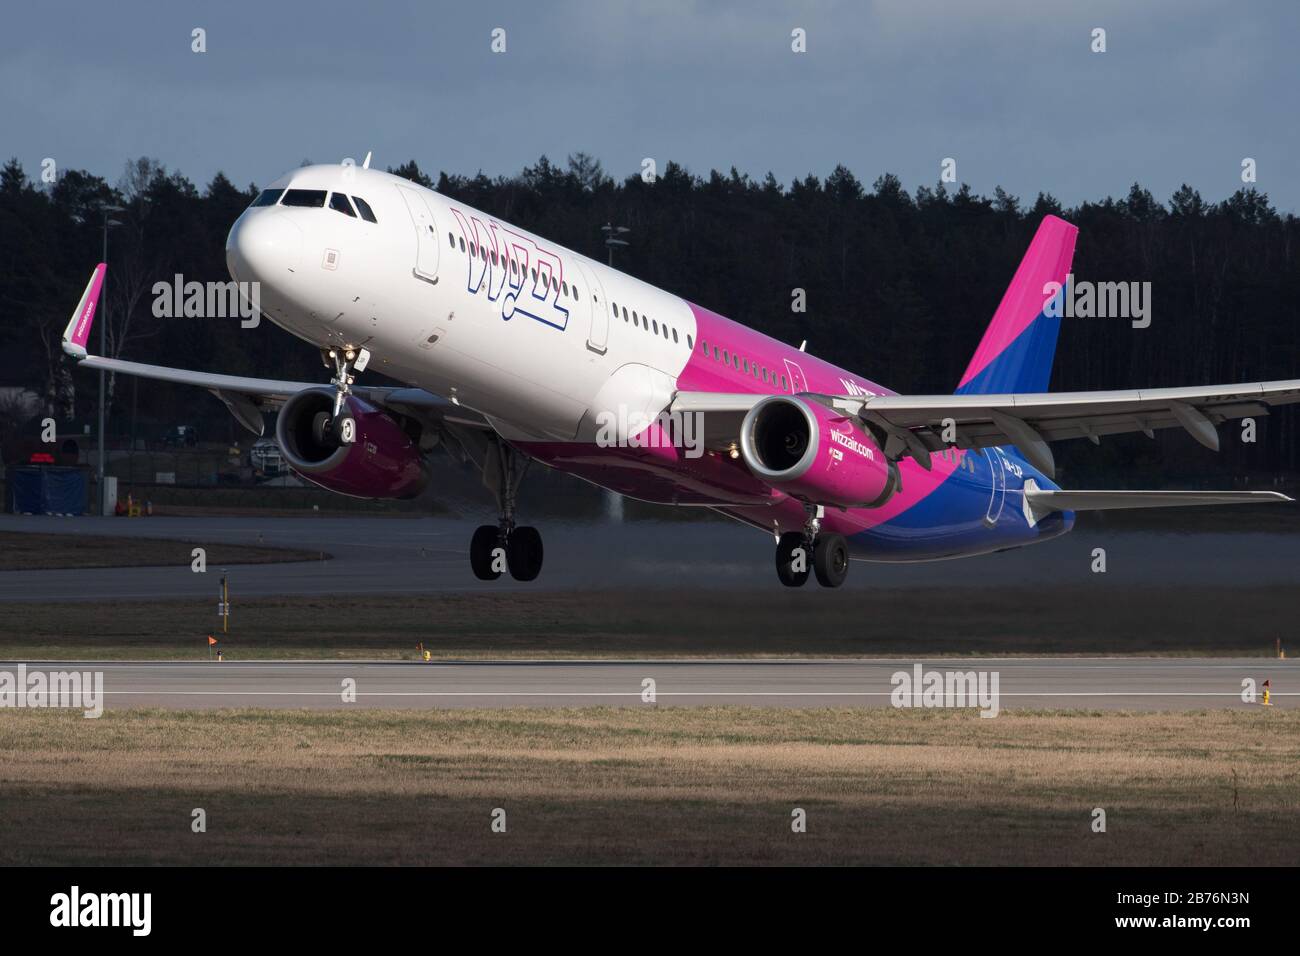 Low cost airline Wizz Air aircraft Airbus A320-232 in Gdansk, Poland. March 11th 2020 © Wojciech Strozyk / Alamy Stock Photo Stock Photo